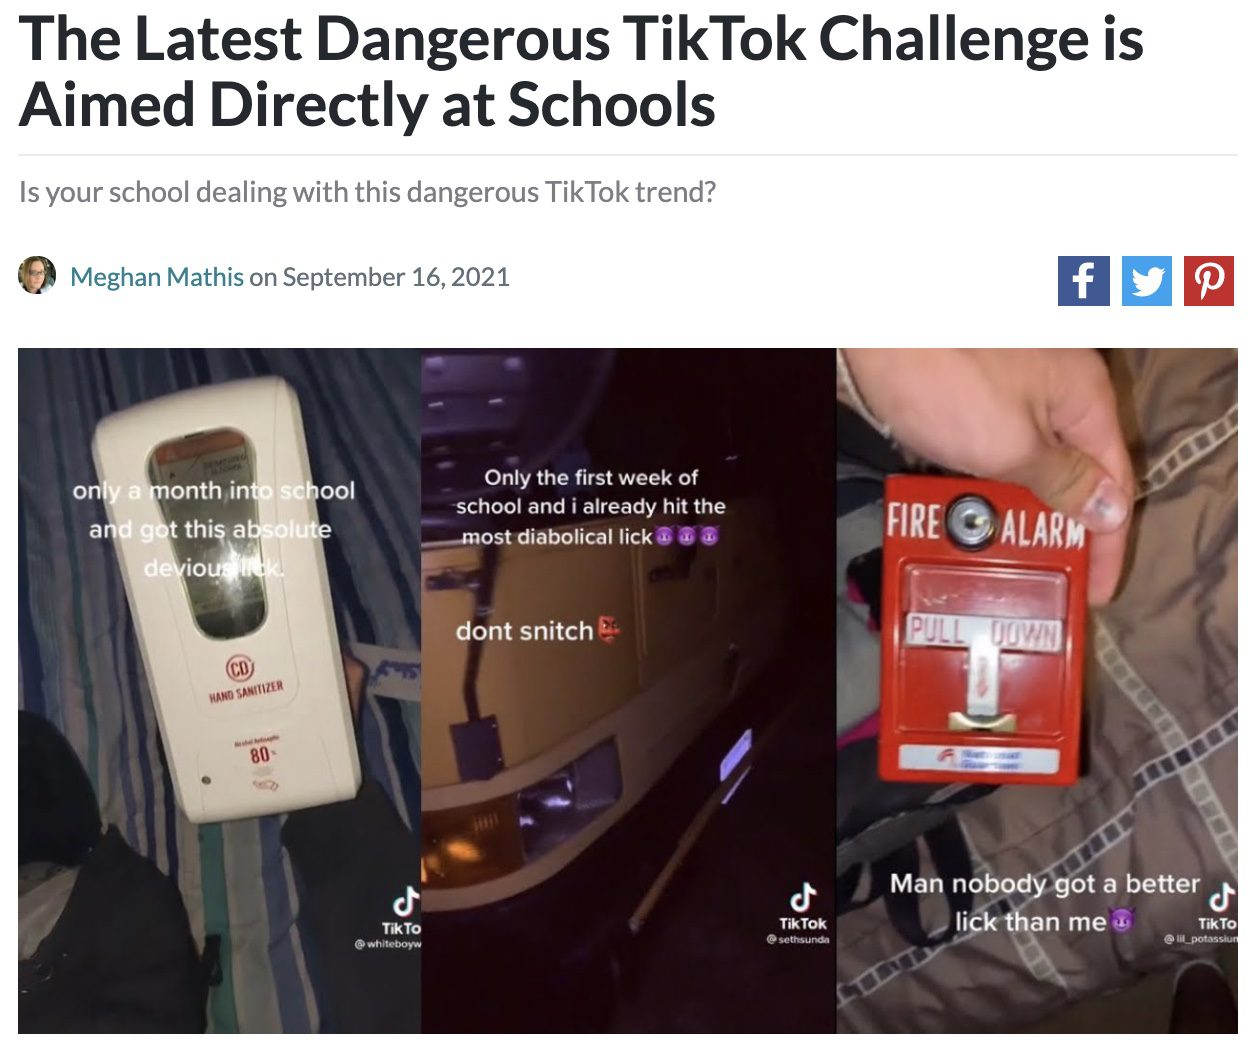 Screencap of an article about a dangerous TikTok trend aimed at school